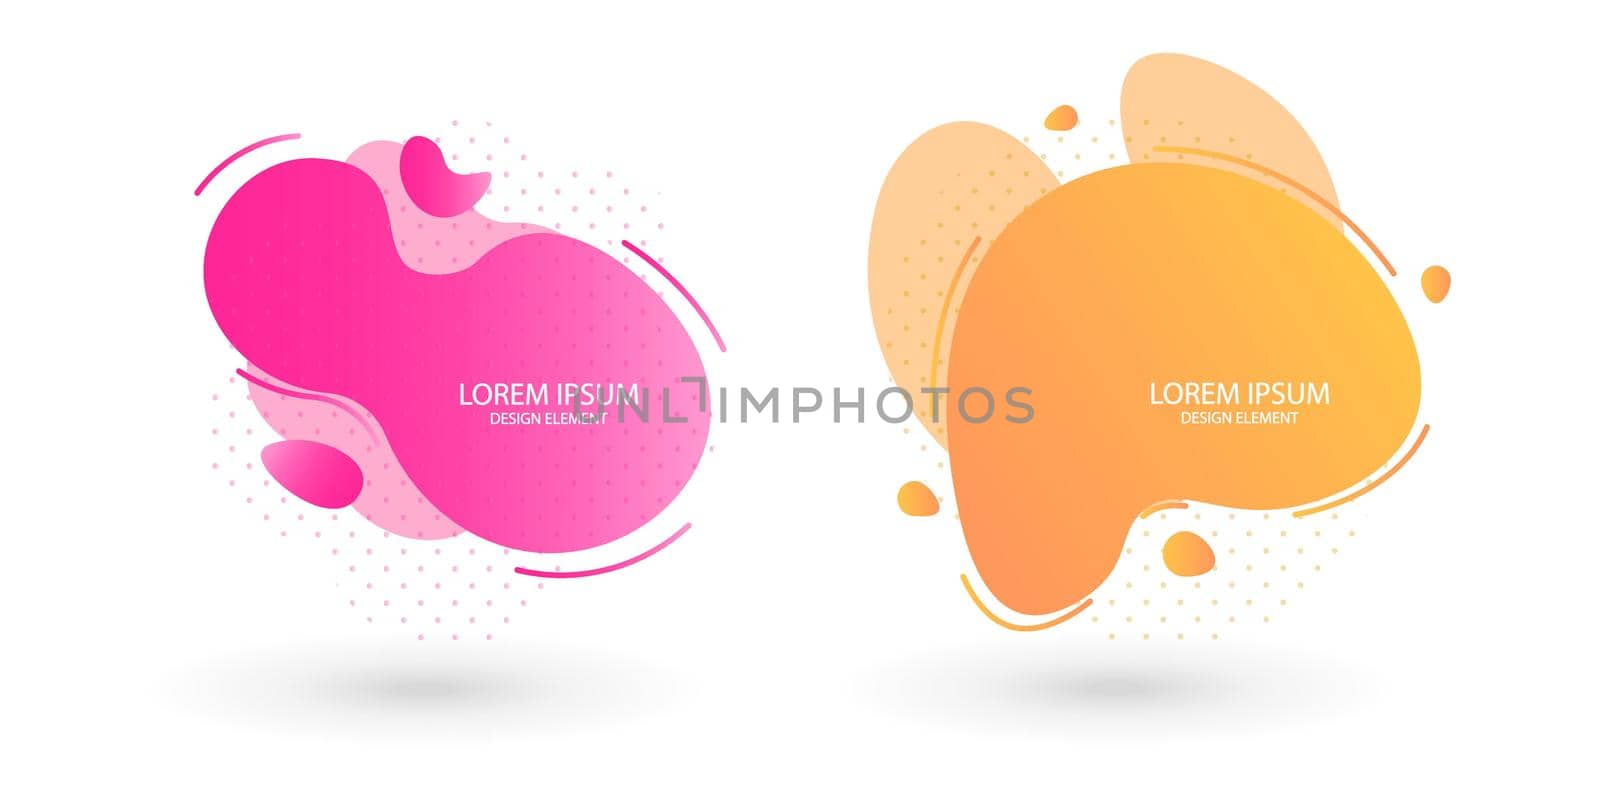 Fluid frame isolated on white background. Set of abstract liquid shapes, colorful elements, gradient waves with geometric lines, dynamical forms. Vector flat design for banners, flyers, business cards